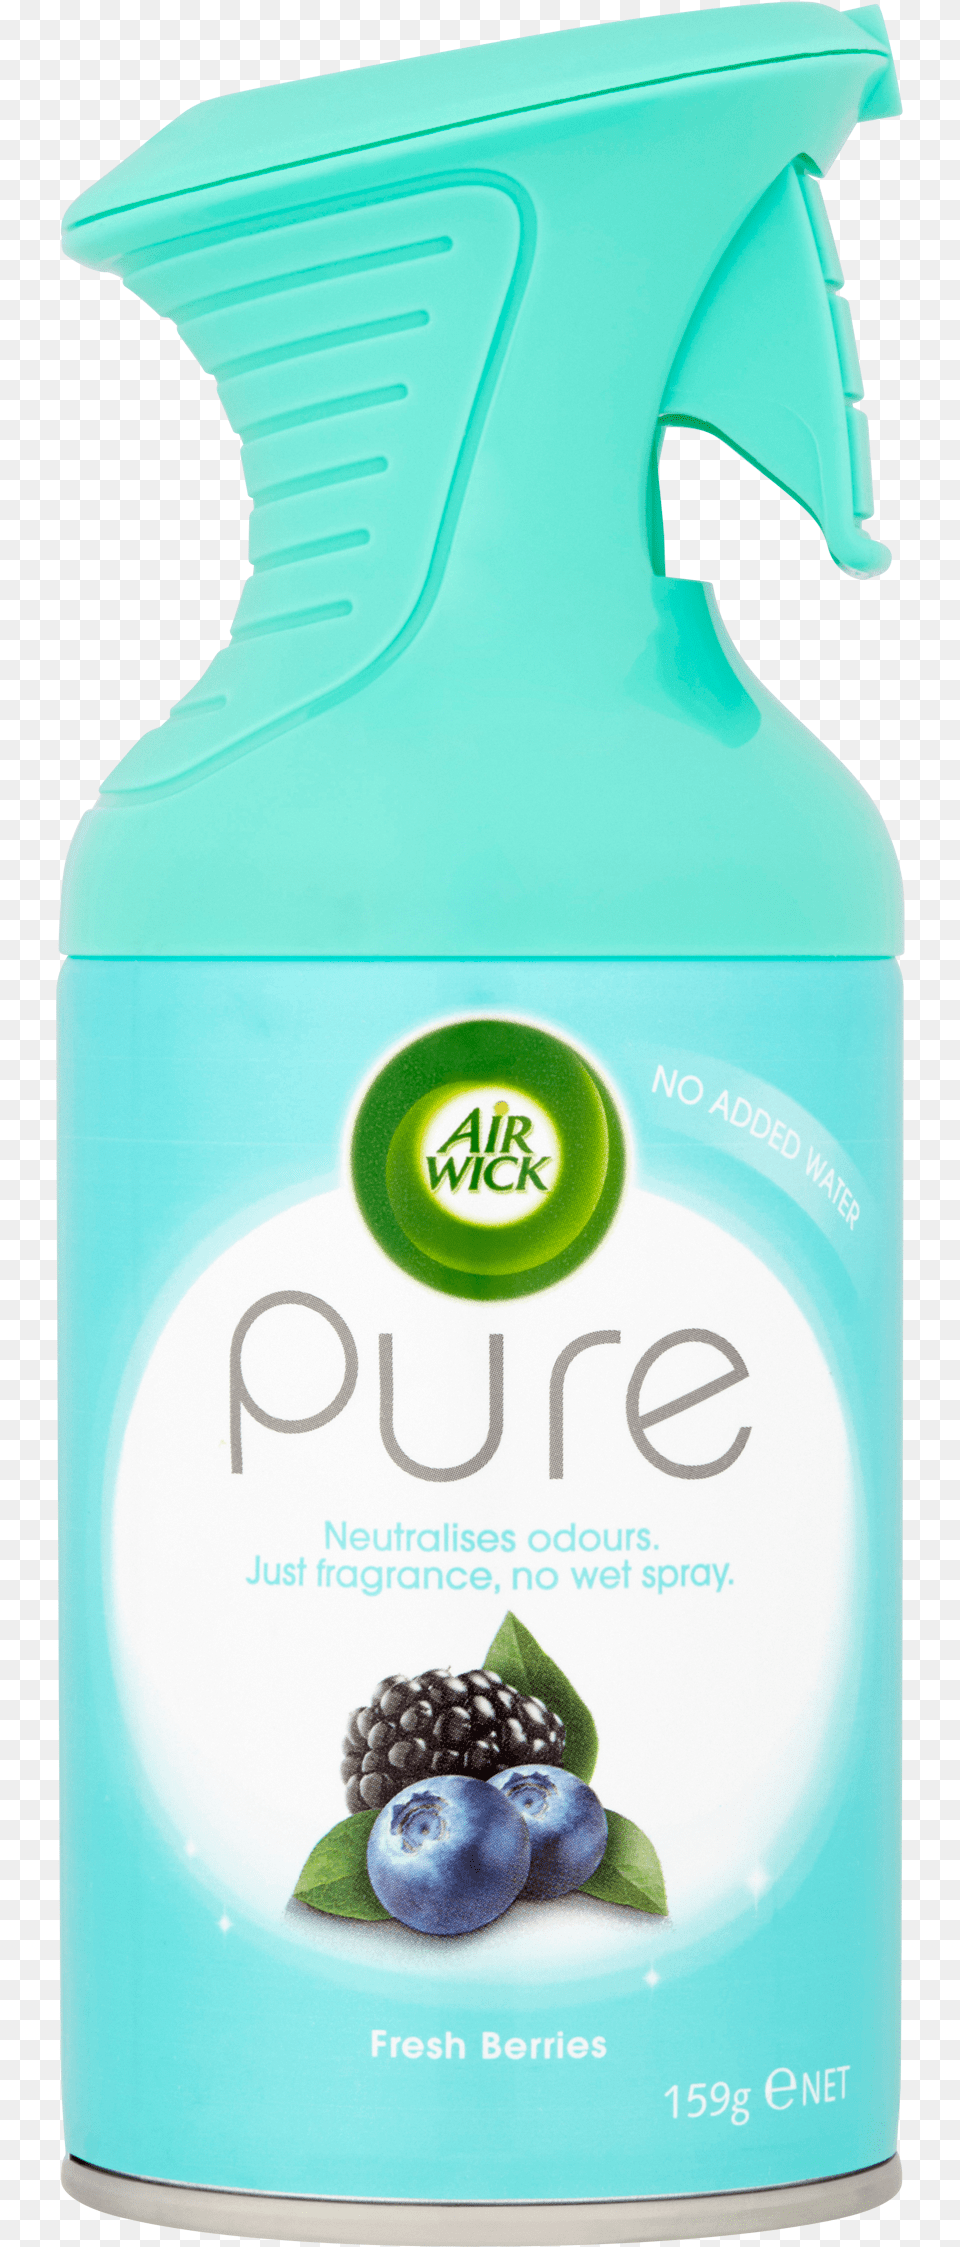 Air Wick Pure Fresh Berries, Berry, Blueberry, Food, Fruit Png Image